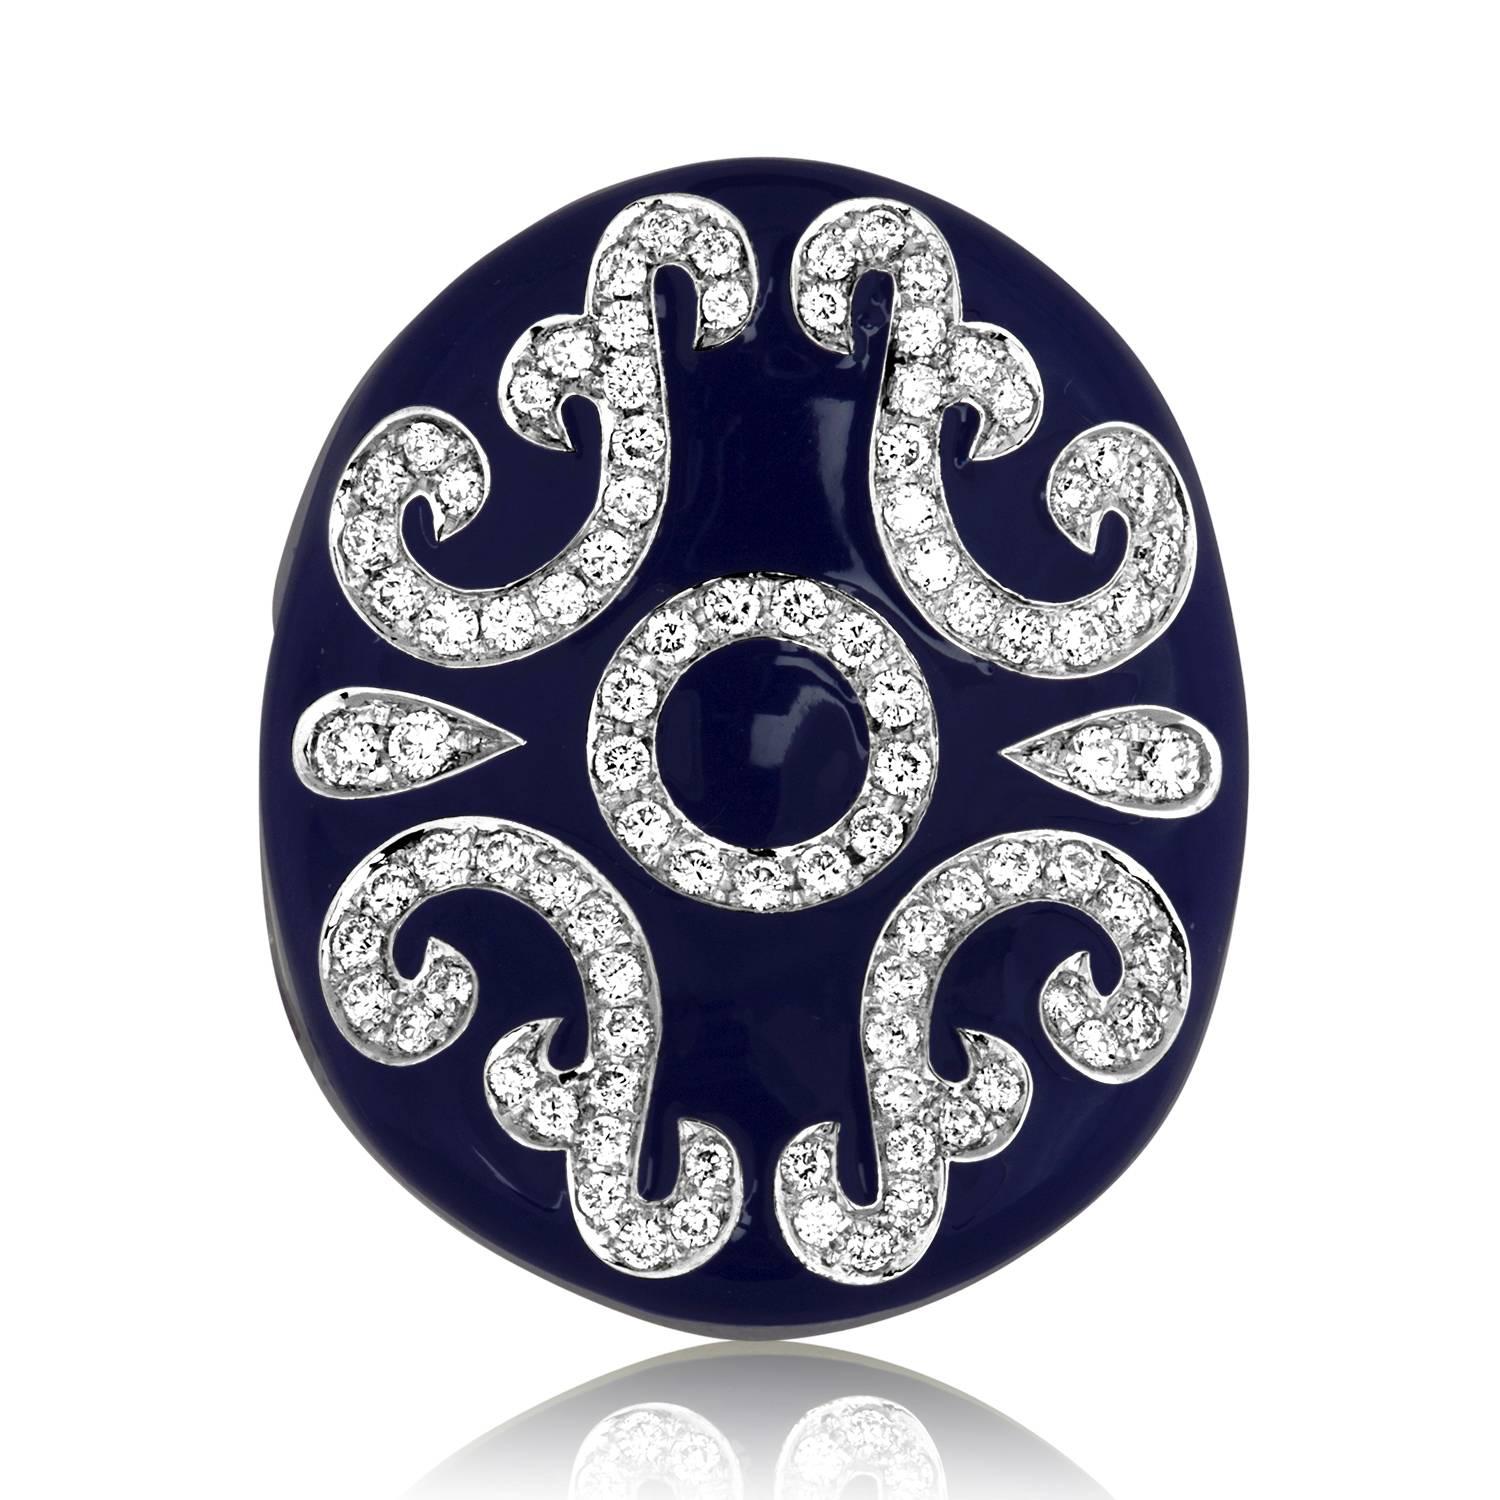 The ring is 18K white gold.
The ring has 0.84 Carat F VS Diamonds.
It has Beautiful Deep Blue Enamel.
Serial #9567.
The ring is a size 7.5, sizable.
The ring measures on top 1